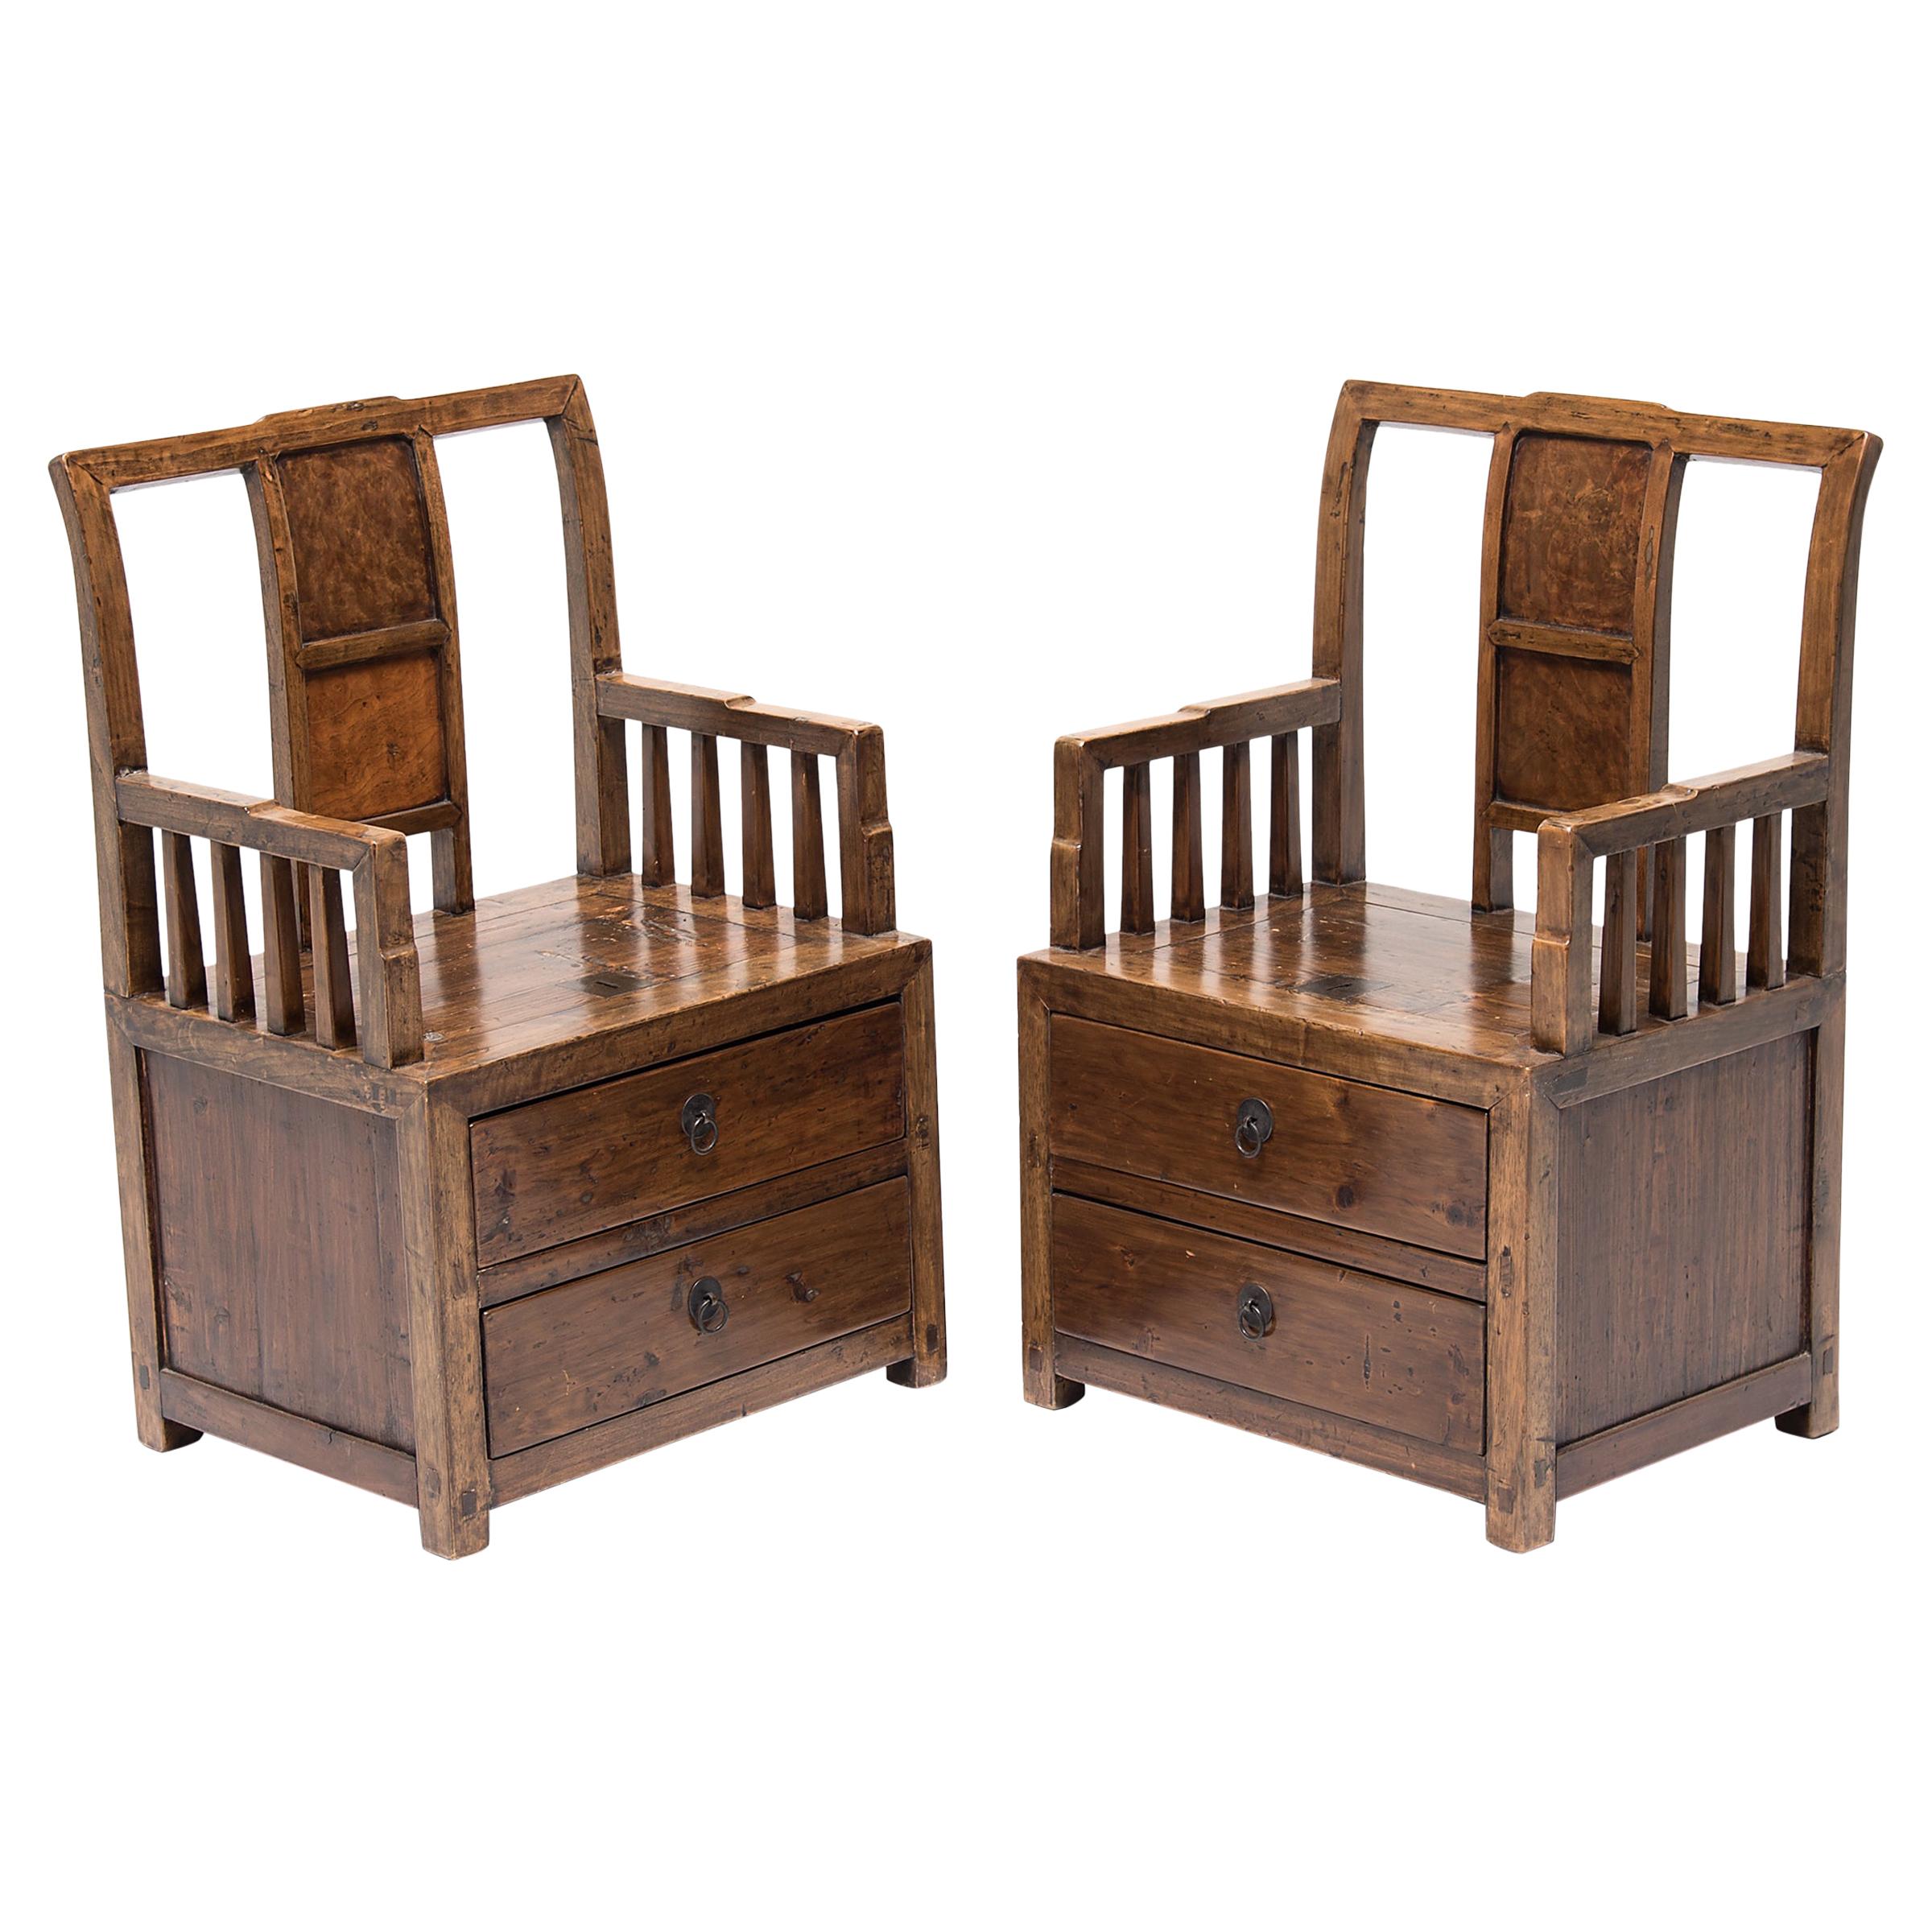 Pair of Chinese Merchant's Armchairs with Burlwood Inlay, c. 1850